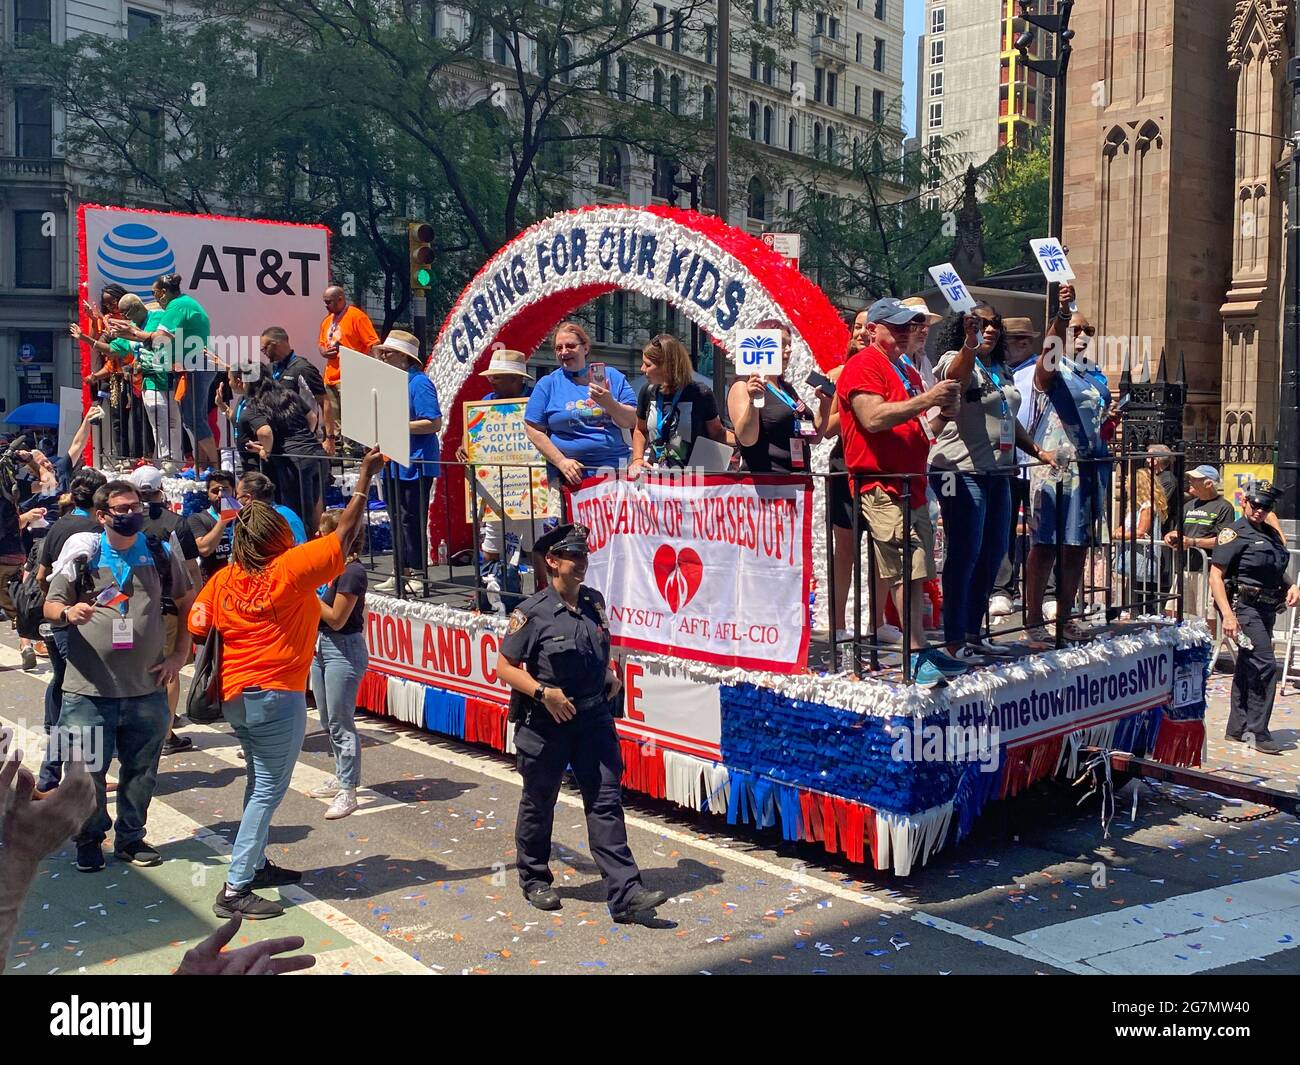 Essential workers who helped New York City through the COVID-19 pandemic were honored with a special parade up the Canyon of Heroes along Broadway in lower Manhattan. UFT (united Federation of Teachers)childcare workers had a float in the parade. Stock Photo